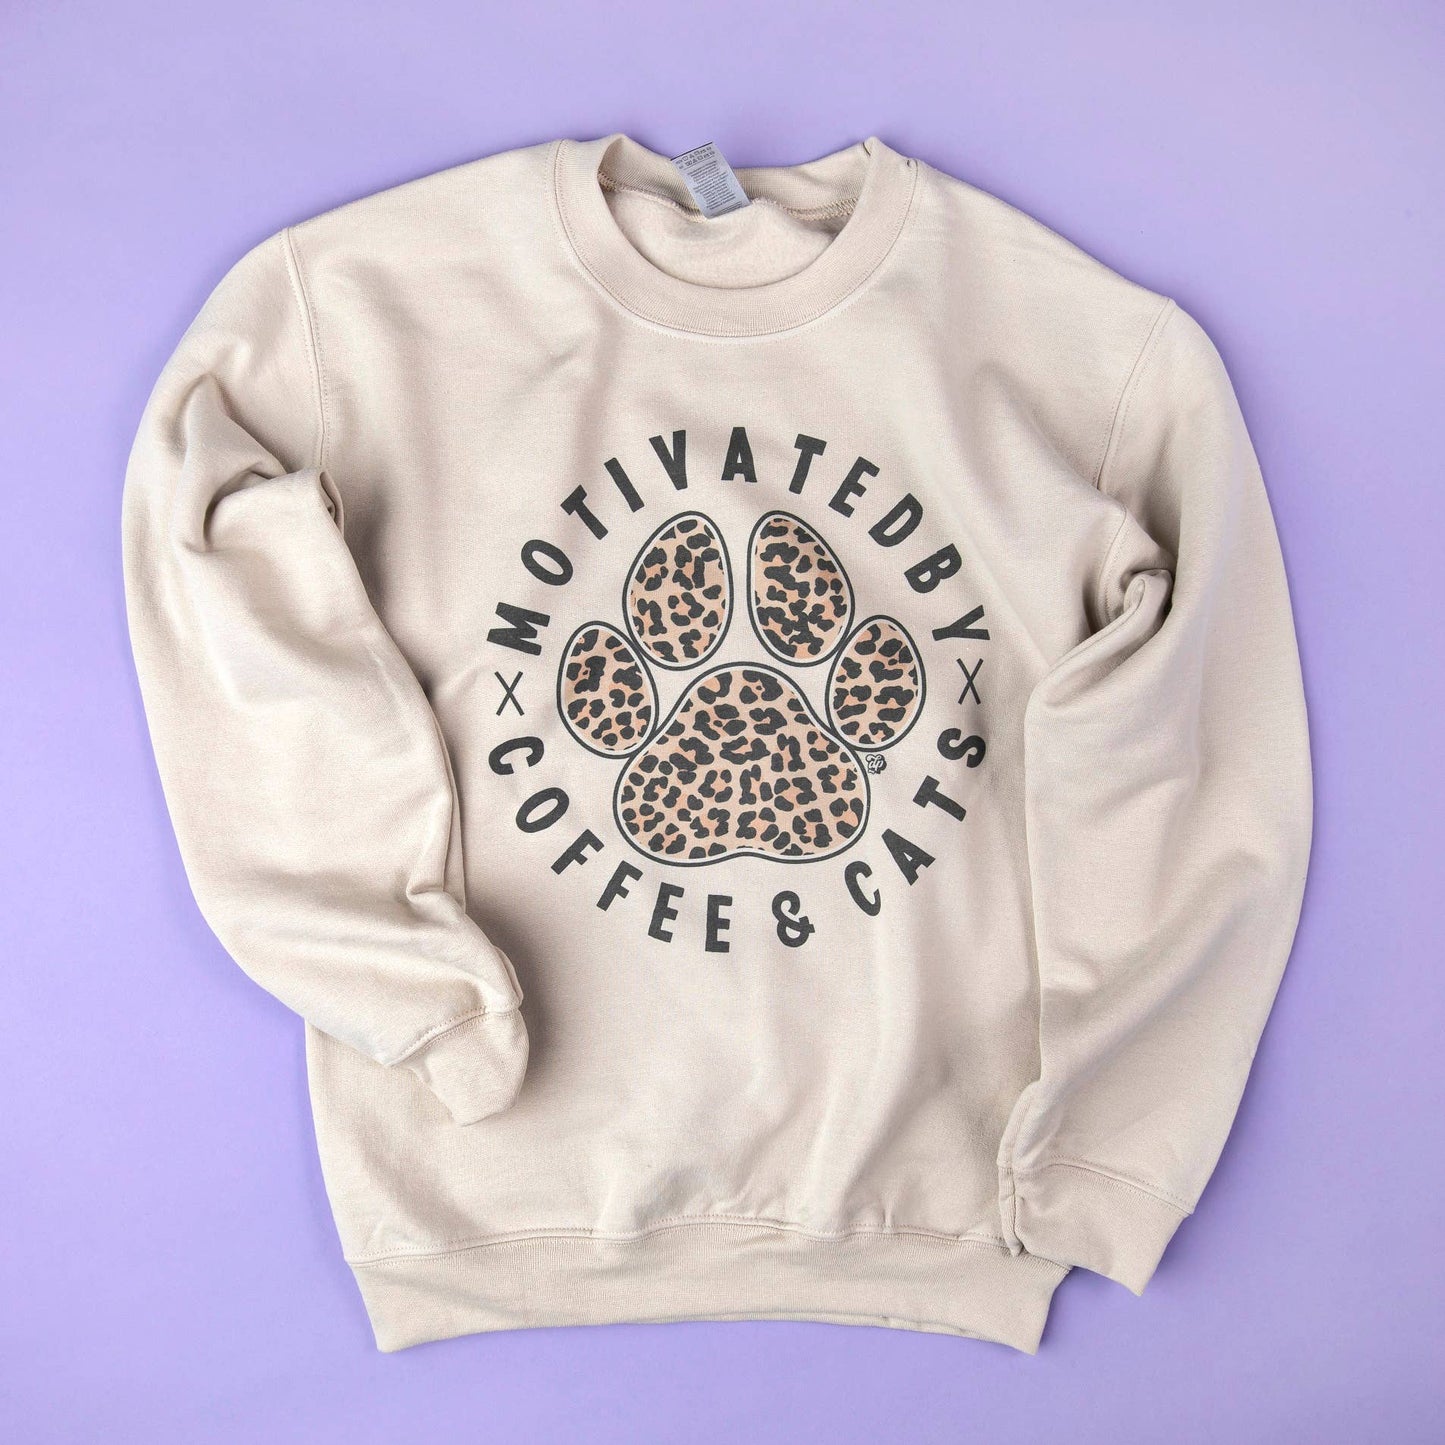 Motivated by Coffee & CATS (Leopard) Sweatshirt